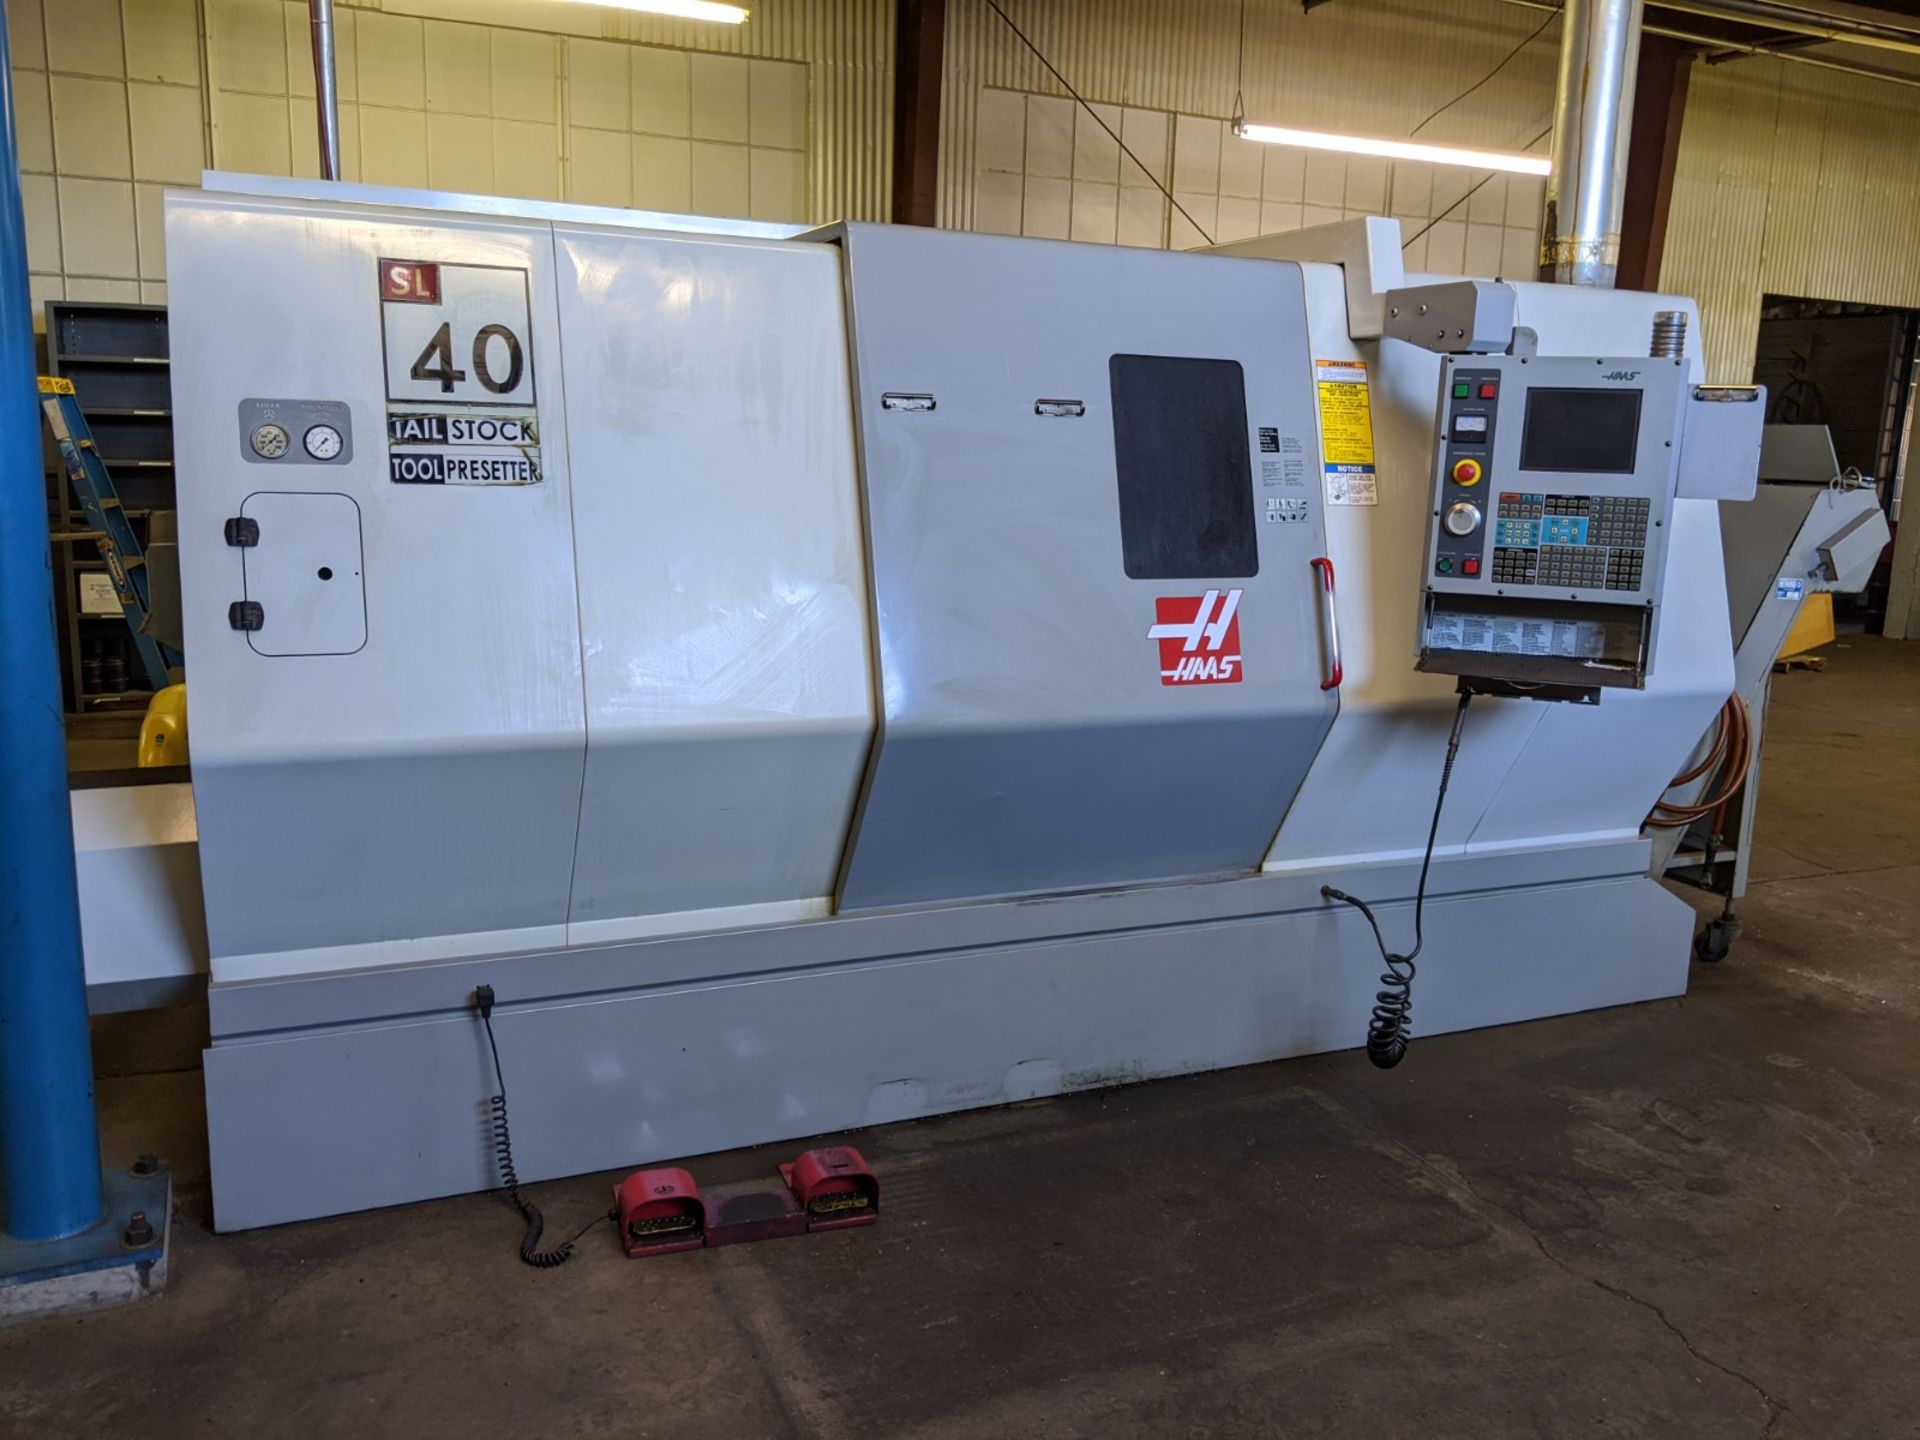 HAAS MODEL SL-40T CNC TURNING CENTER; S/N 69082, 18" 3-JAW CHUCK, 10 POSITION TURRET, TAILSTOCK, - Image 14 of 14